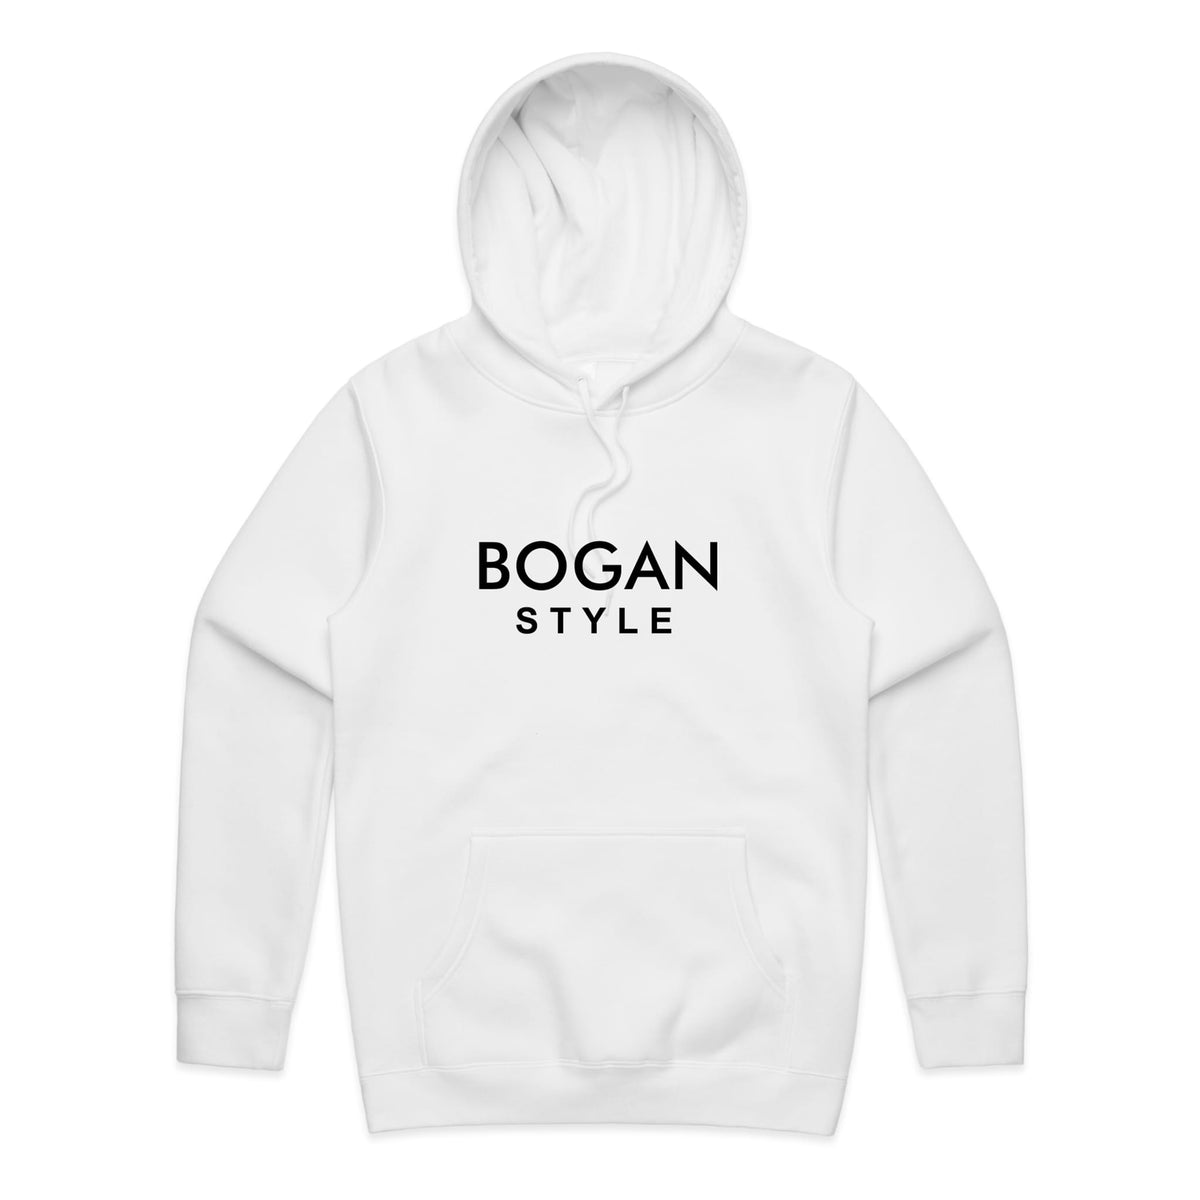 white hoodie with Bogan style printed on the front.